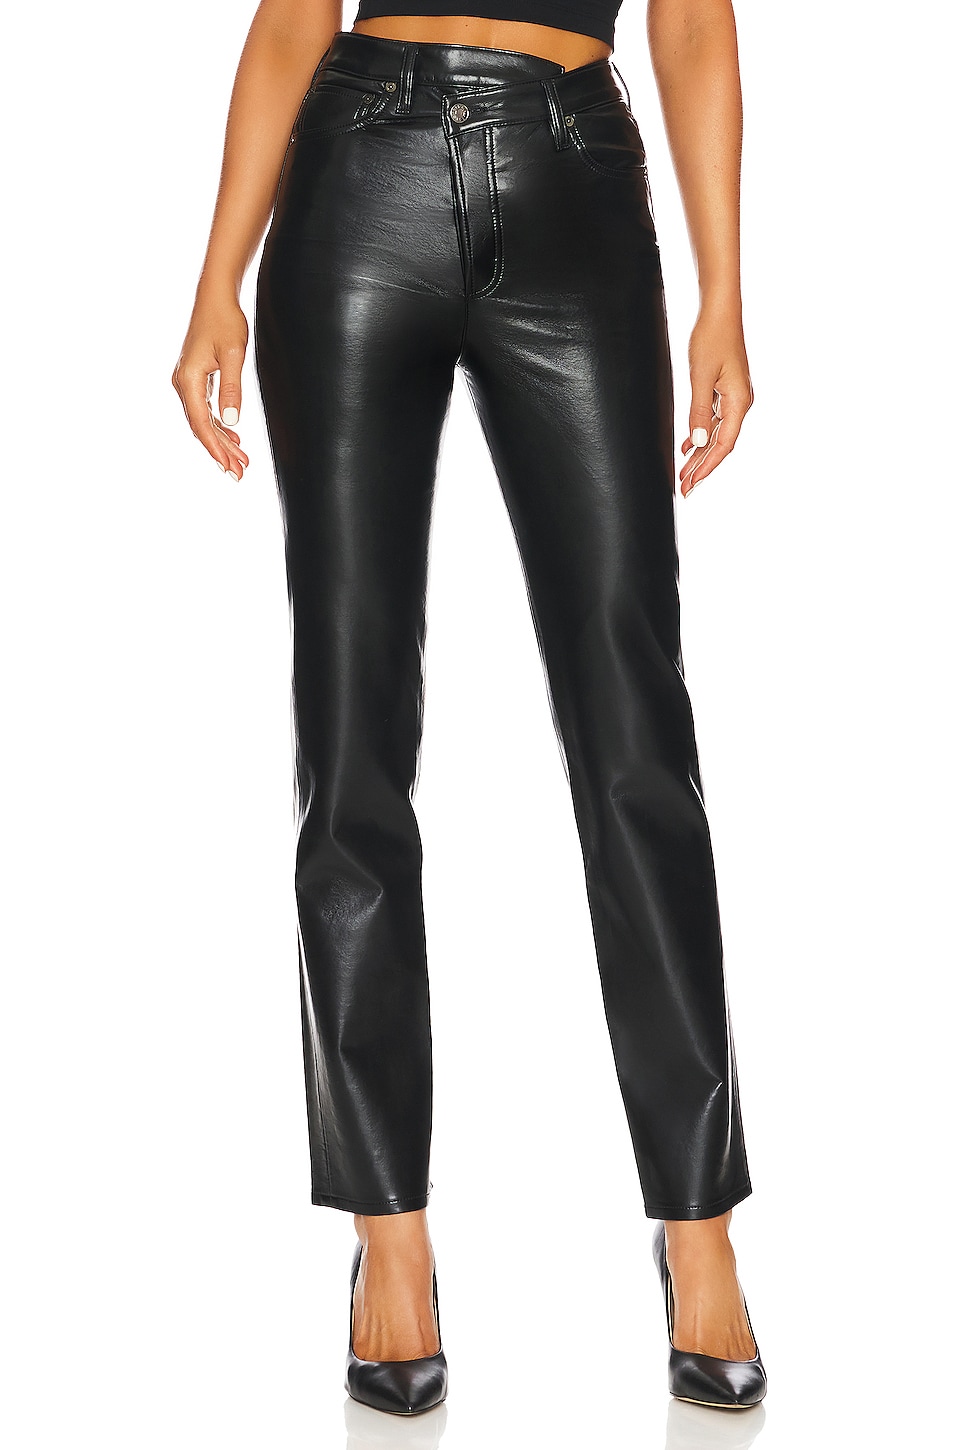 Recycled Leather Criss Cross Straight in Black FWRD Women Clothing Pants Leather Pants 